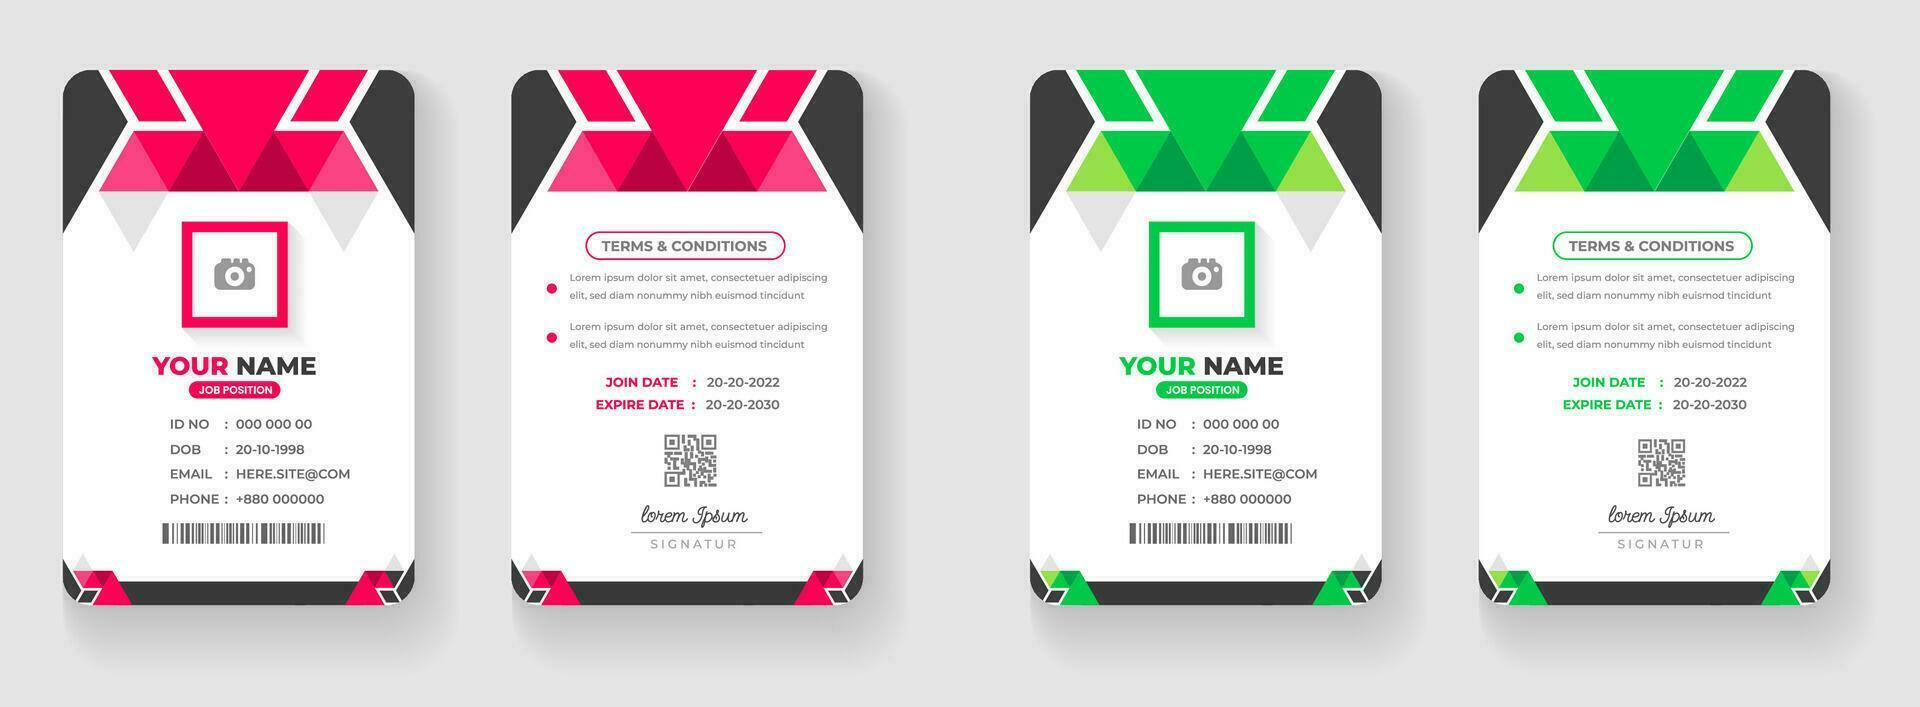 corporate business office id card design set with red and green color. vector